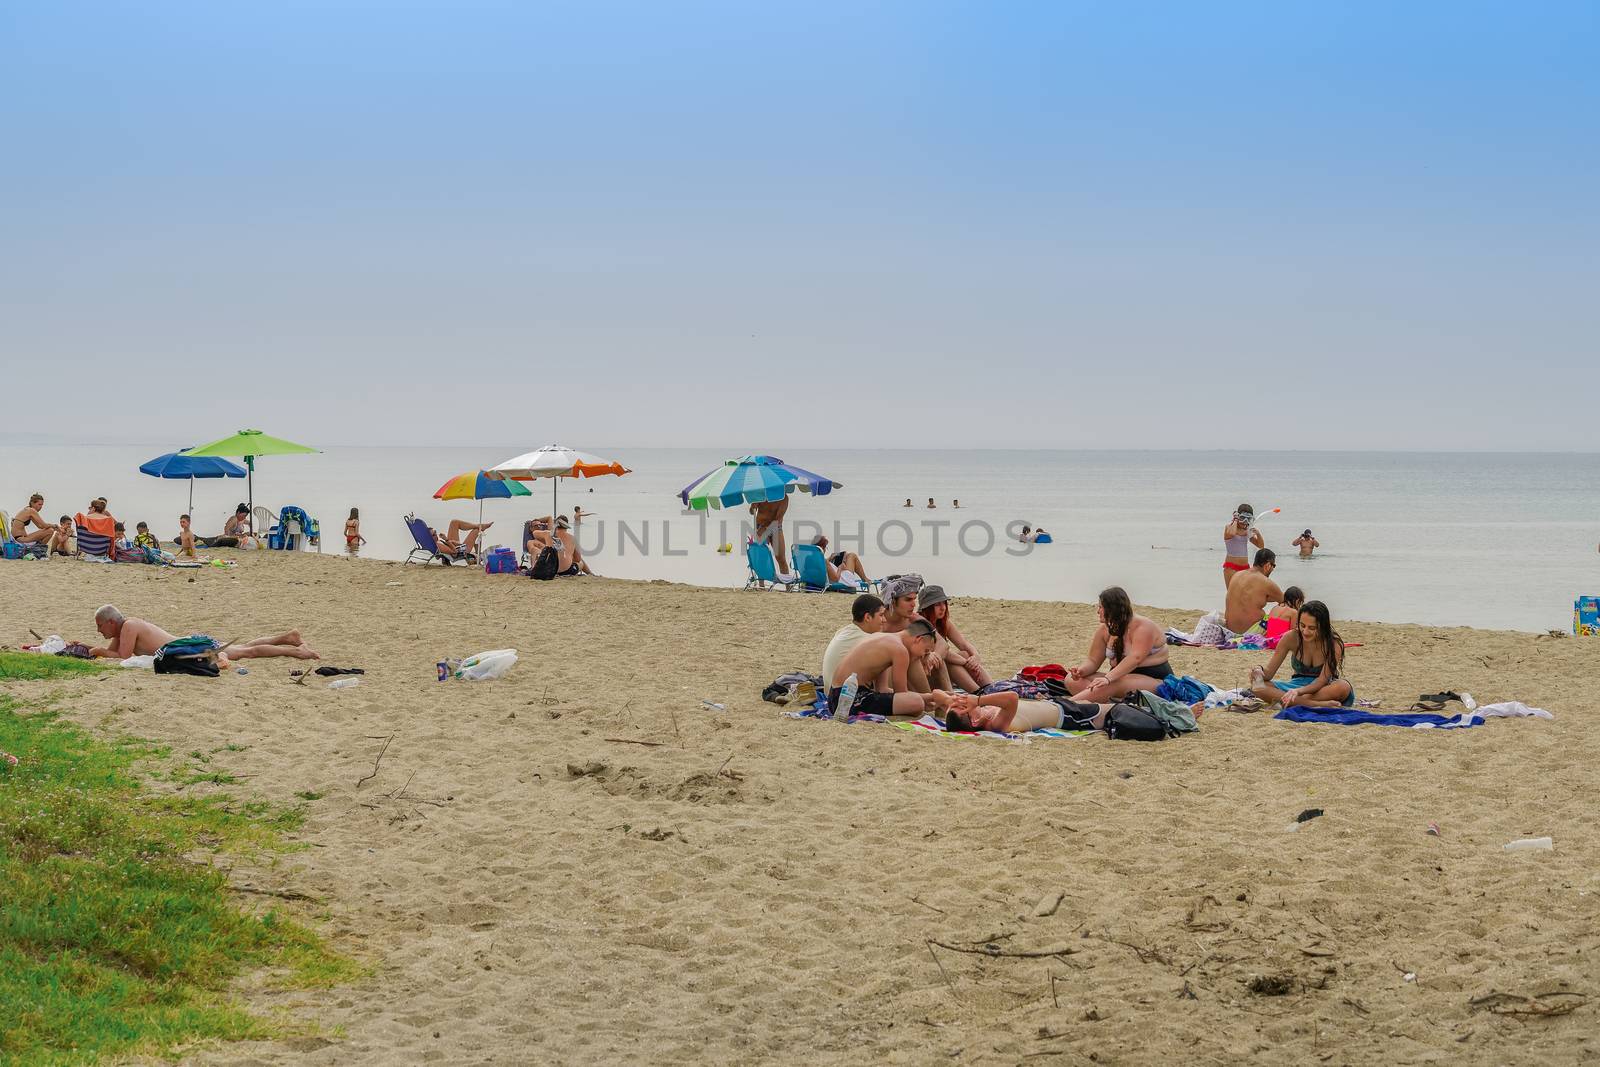 Bathers with sun umbrellas on sand by the sea at Thessaloniki suburbs, after government suggests people keep a distance.